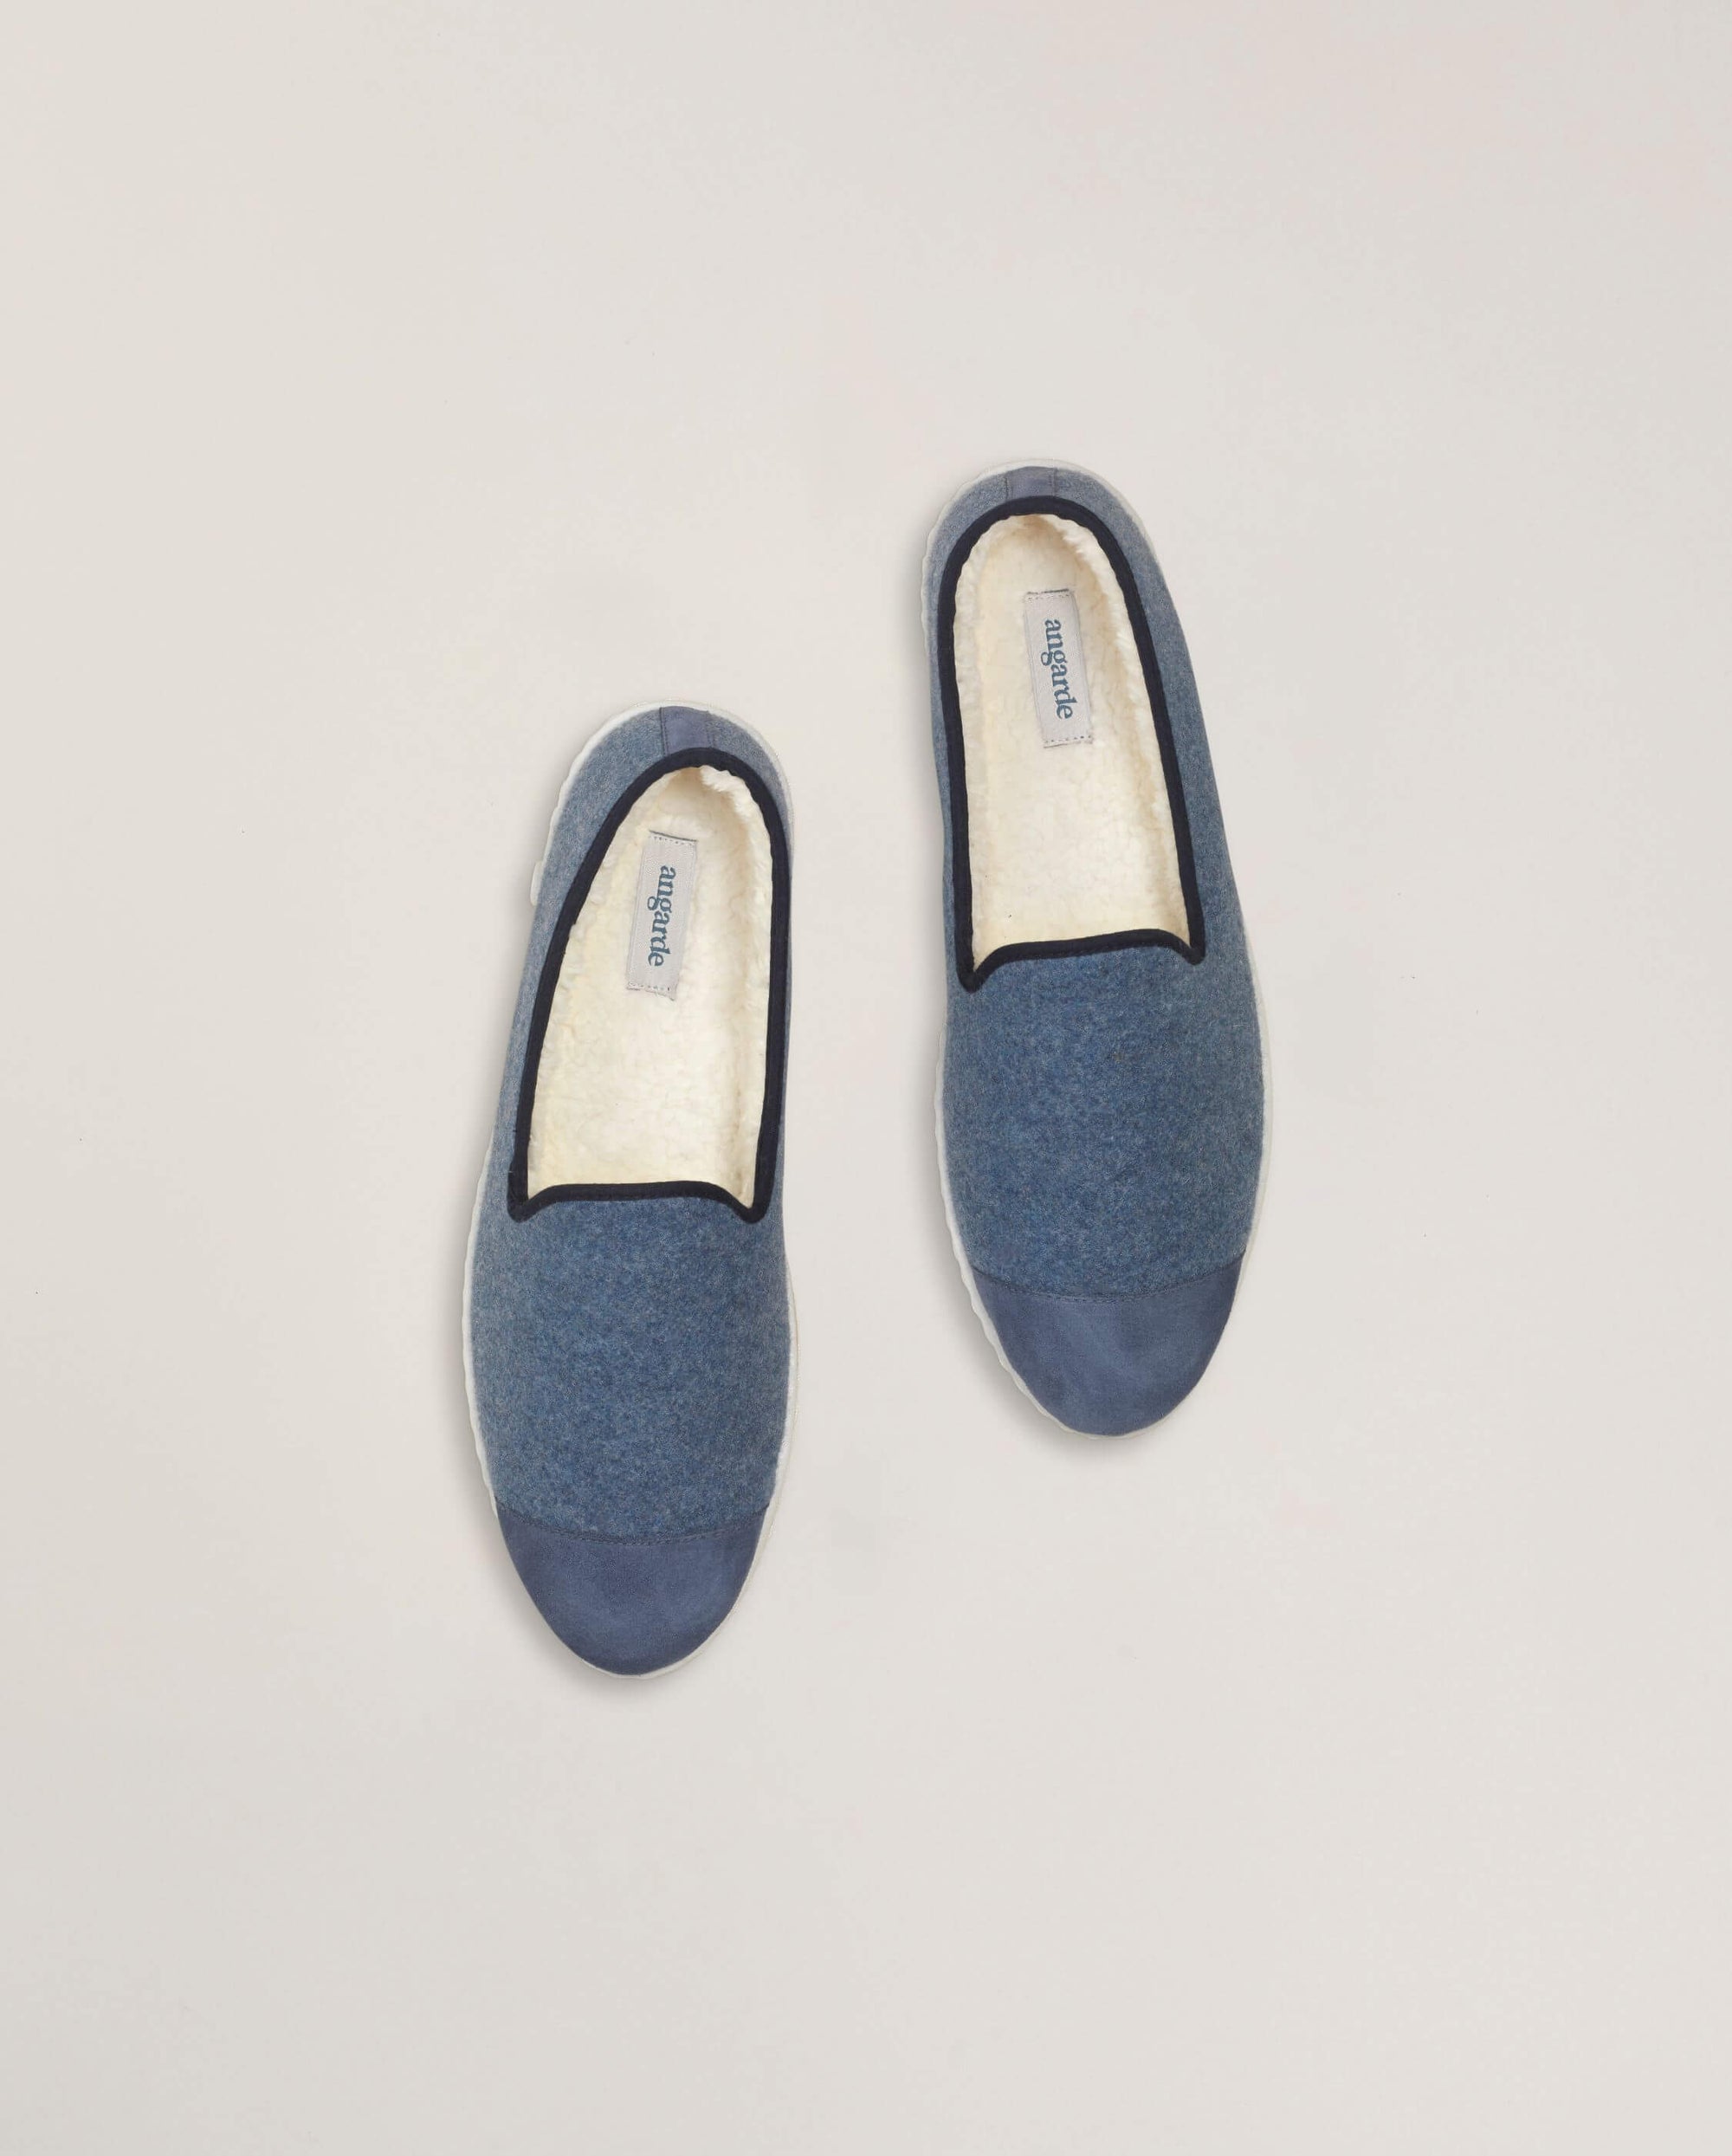 Limited edition men's slipper, navy jeans